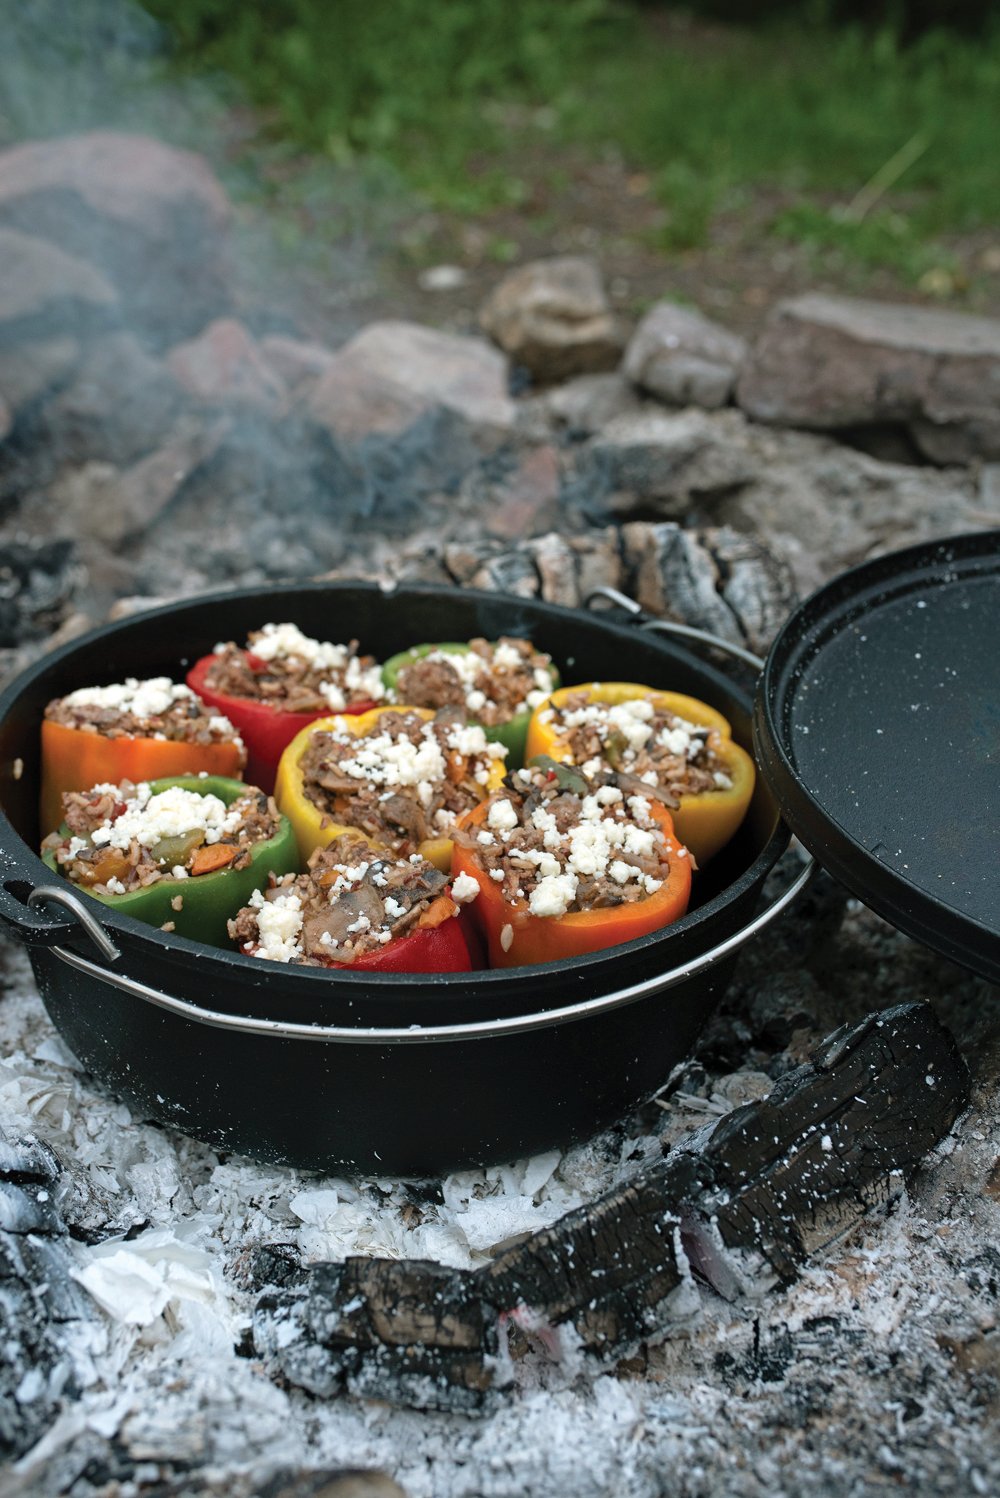 DUTCH OVEN COOKERS